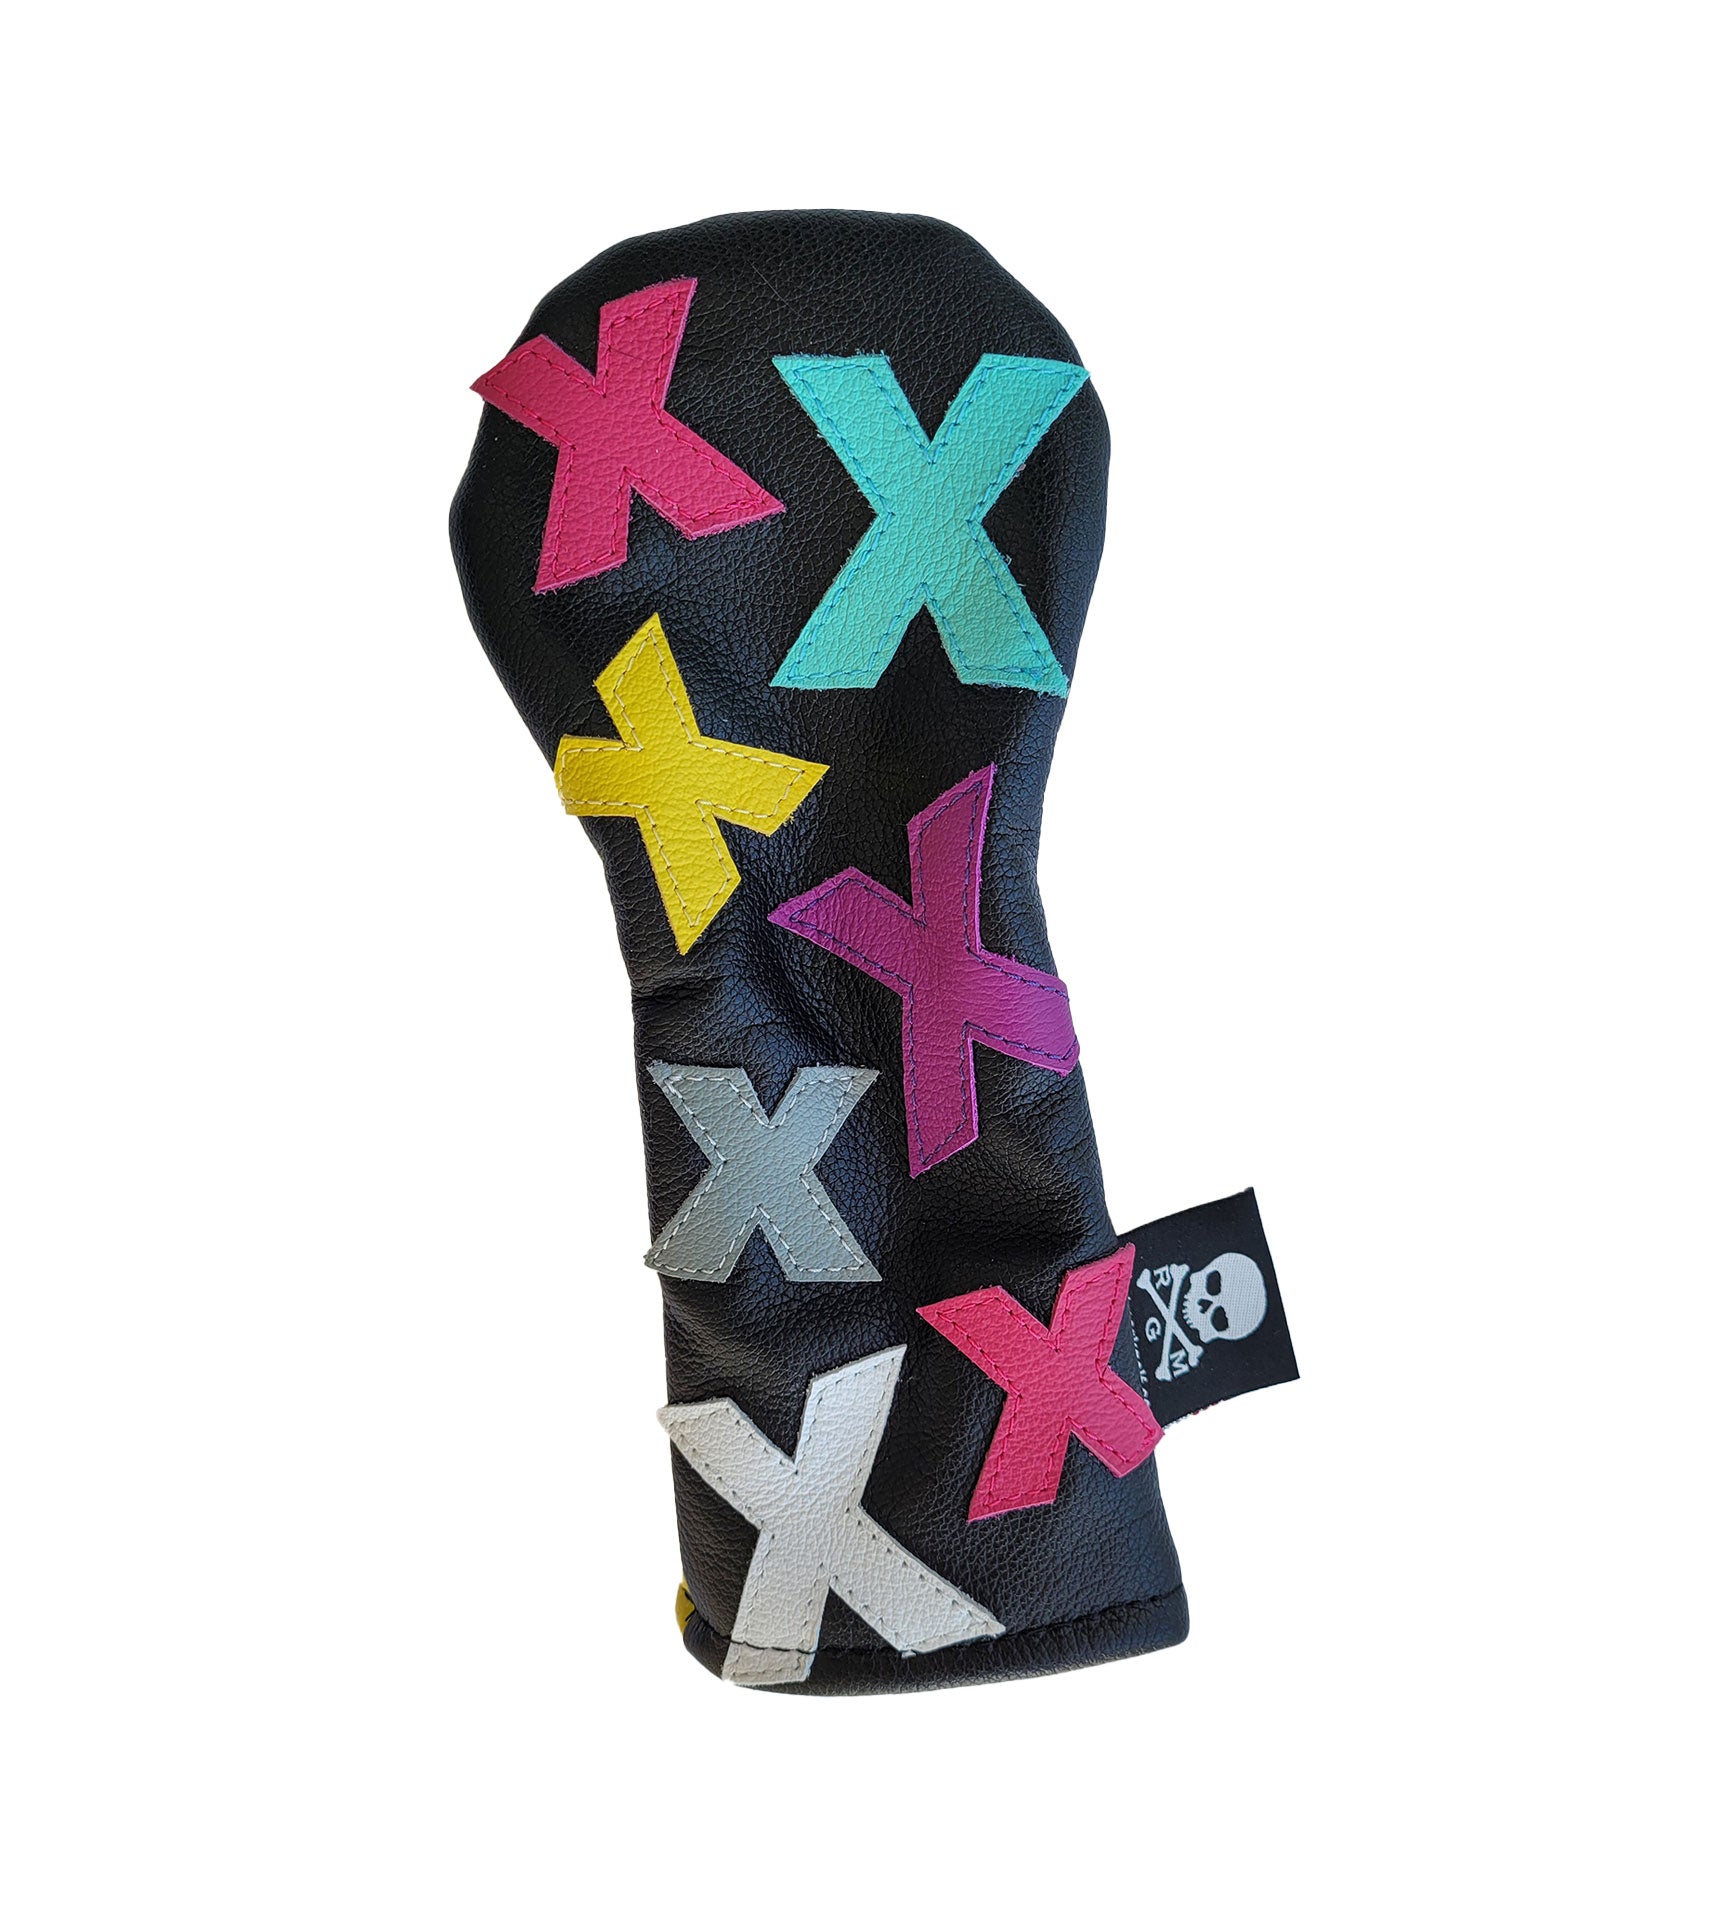 One-Of-A-Kind! The Black "Dancing X's" Hybrid Headcover - Robert Mark Golf